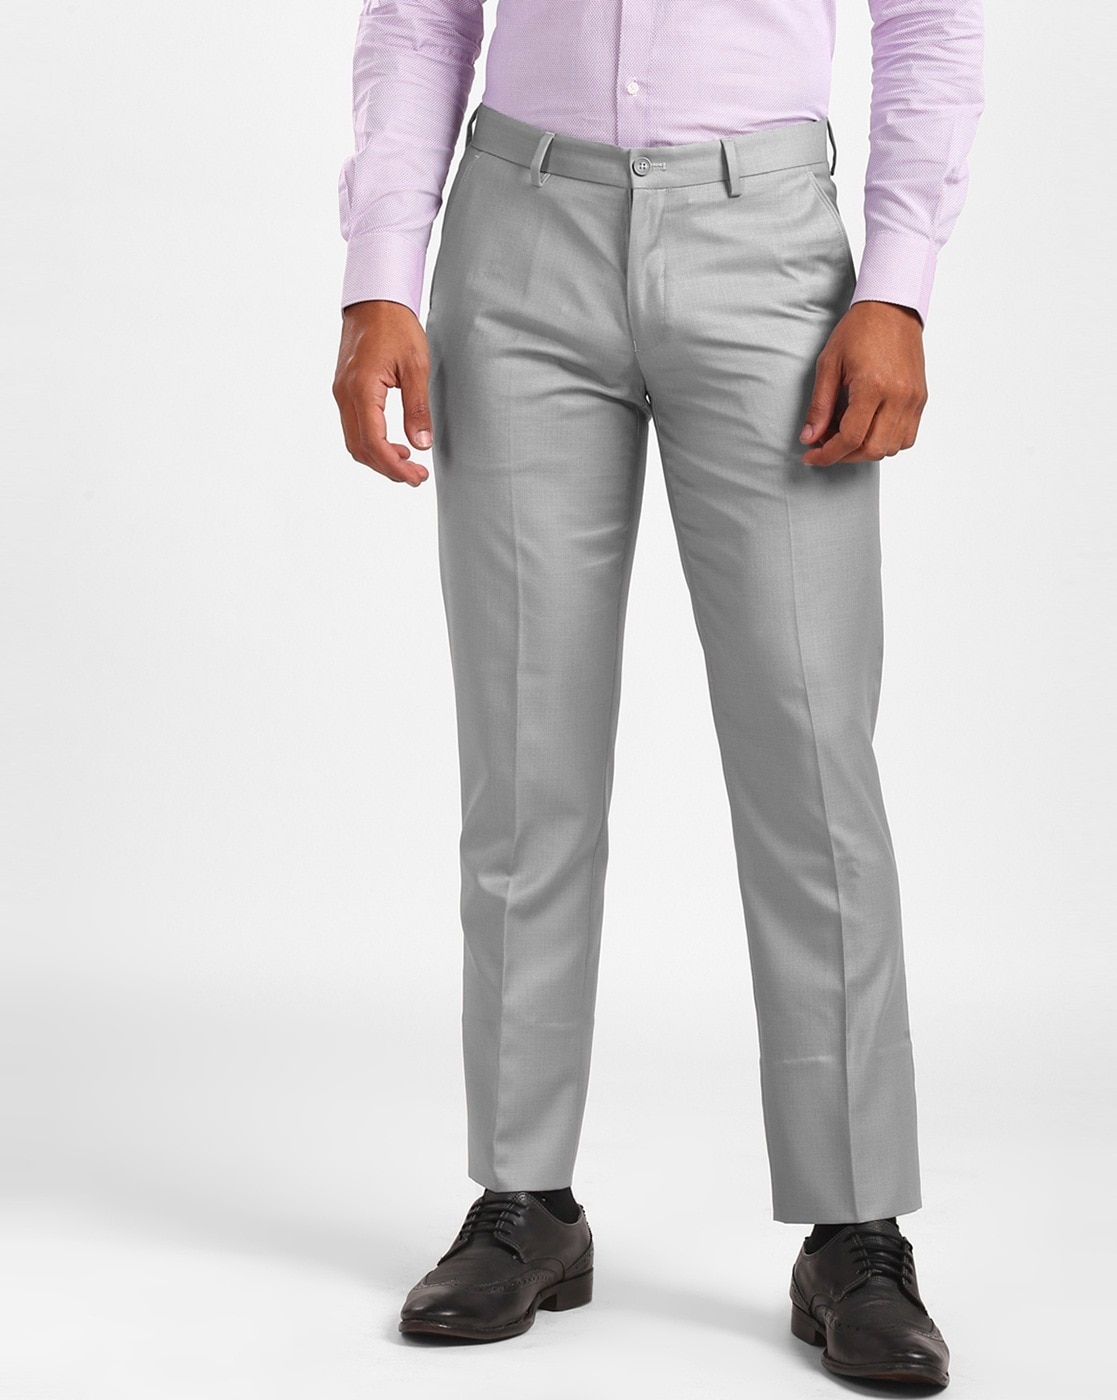 Buy Grey Trousers & Pants for Men by KNIGHTHOOD Online | Ajio.com